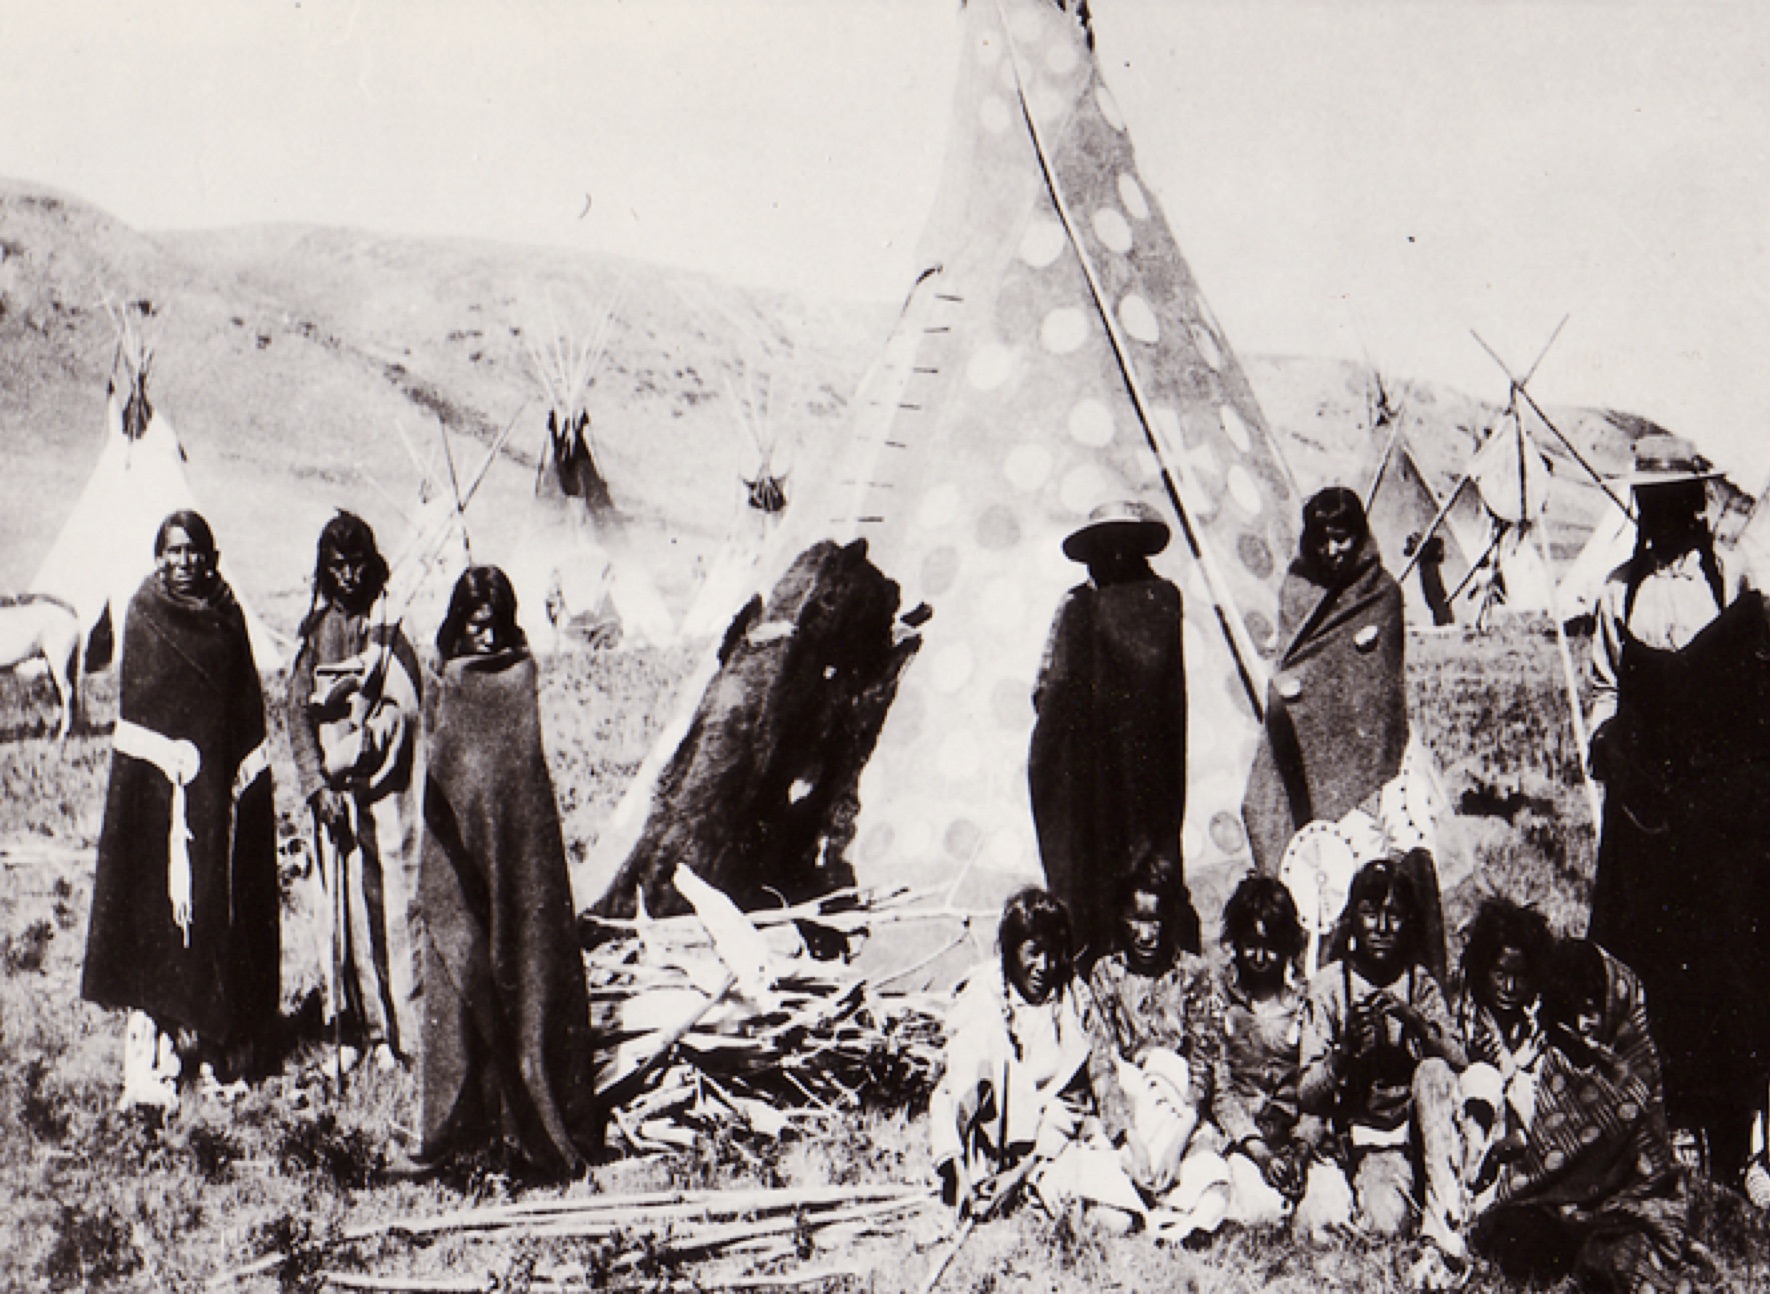 Blackfoot family in Southern Saskatchewan. A way of life that would see the way that they lived change drastically with the arrival of newcomers to Western Canada.